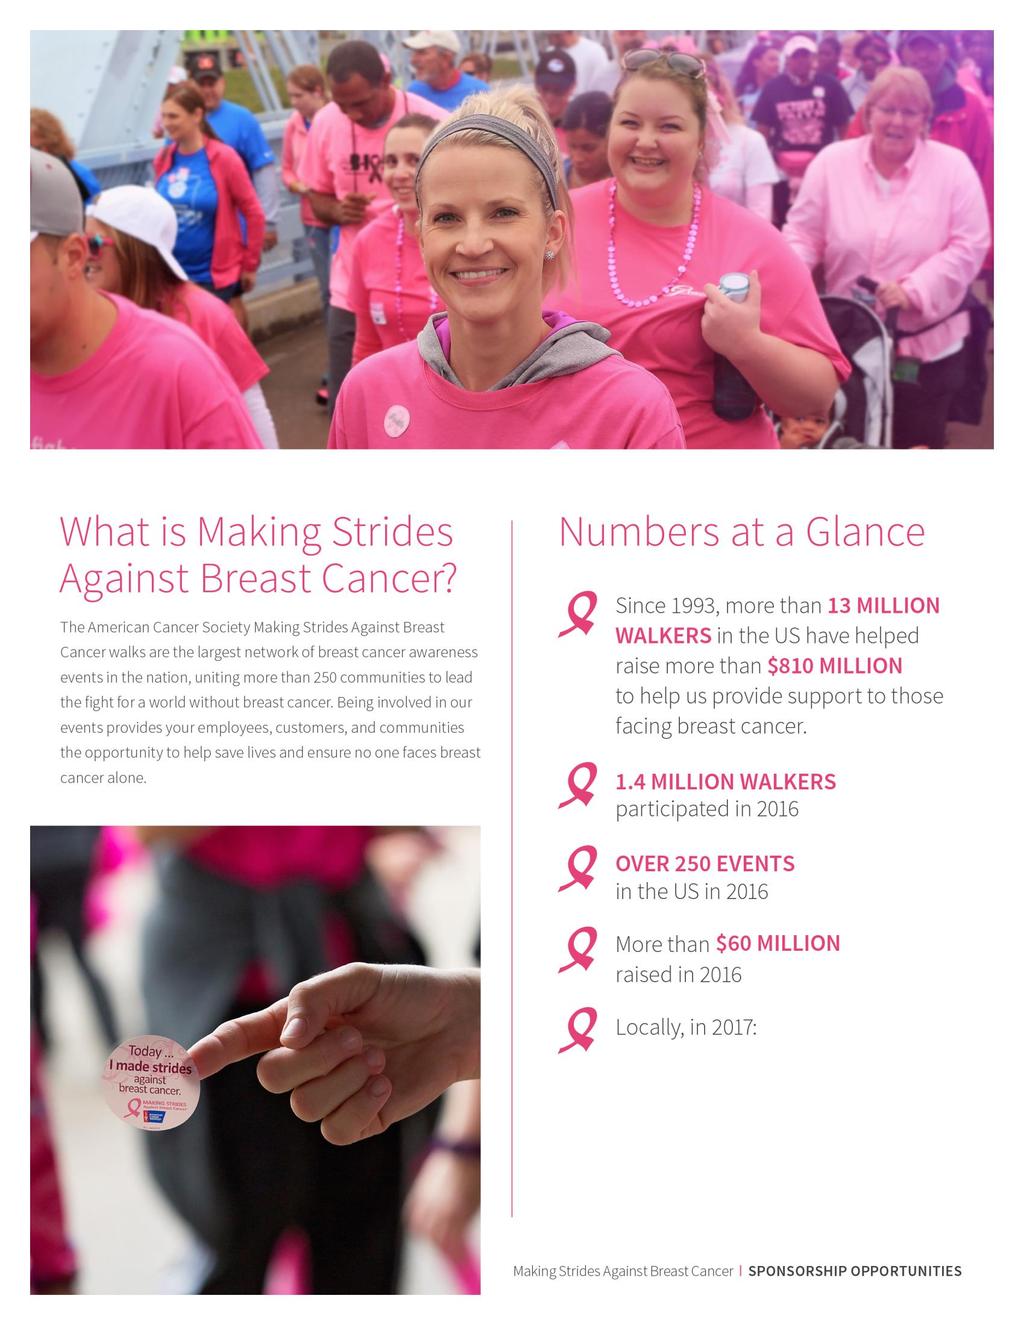 Since 1993, more than 14 MILLION WALKERS in the US have helped raise more than $870 MILLION to help us provide support to those facing breast cancer. 1.2 MILLION WALKERS participated in 2017 OVER 200 EVENTS in the US in 2017 More than $60 MILLION raised in 2017 $1.